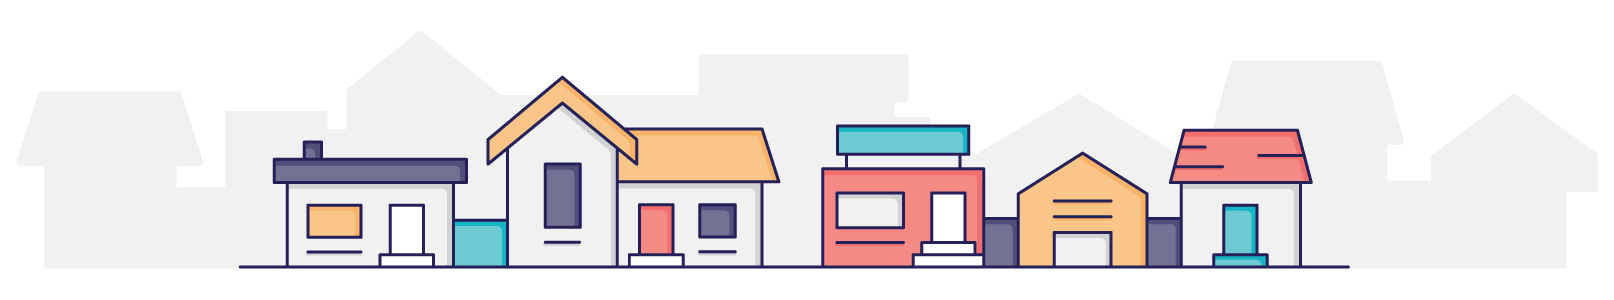 header houses icons